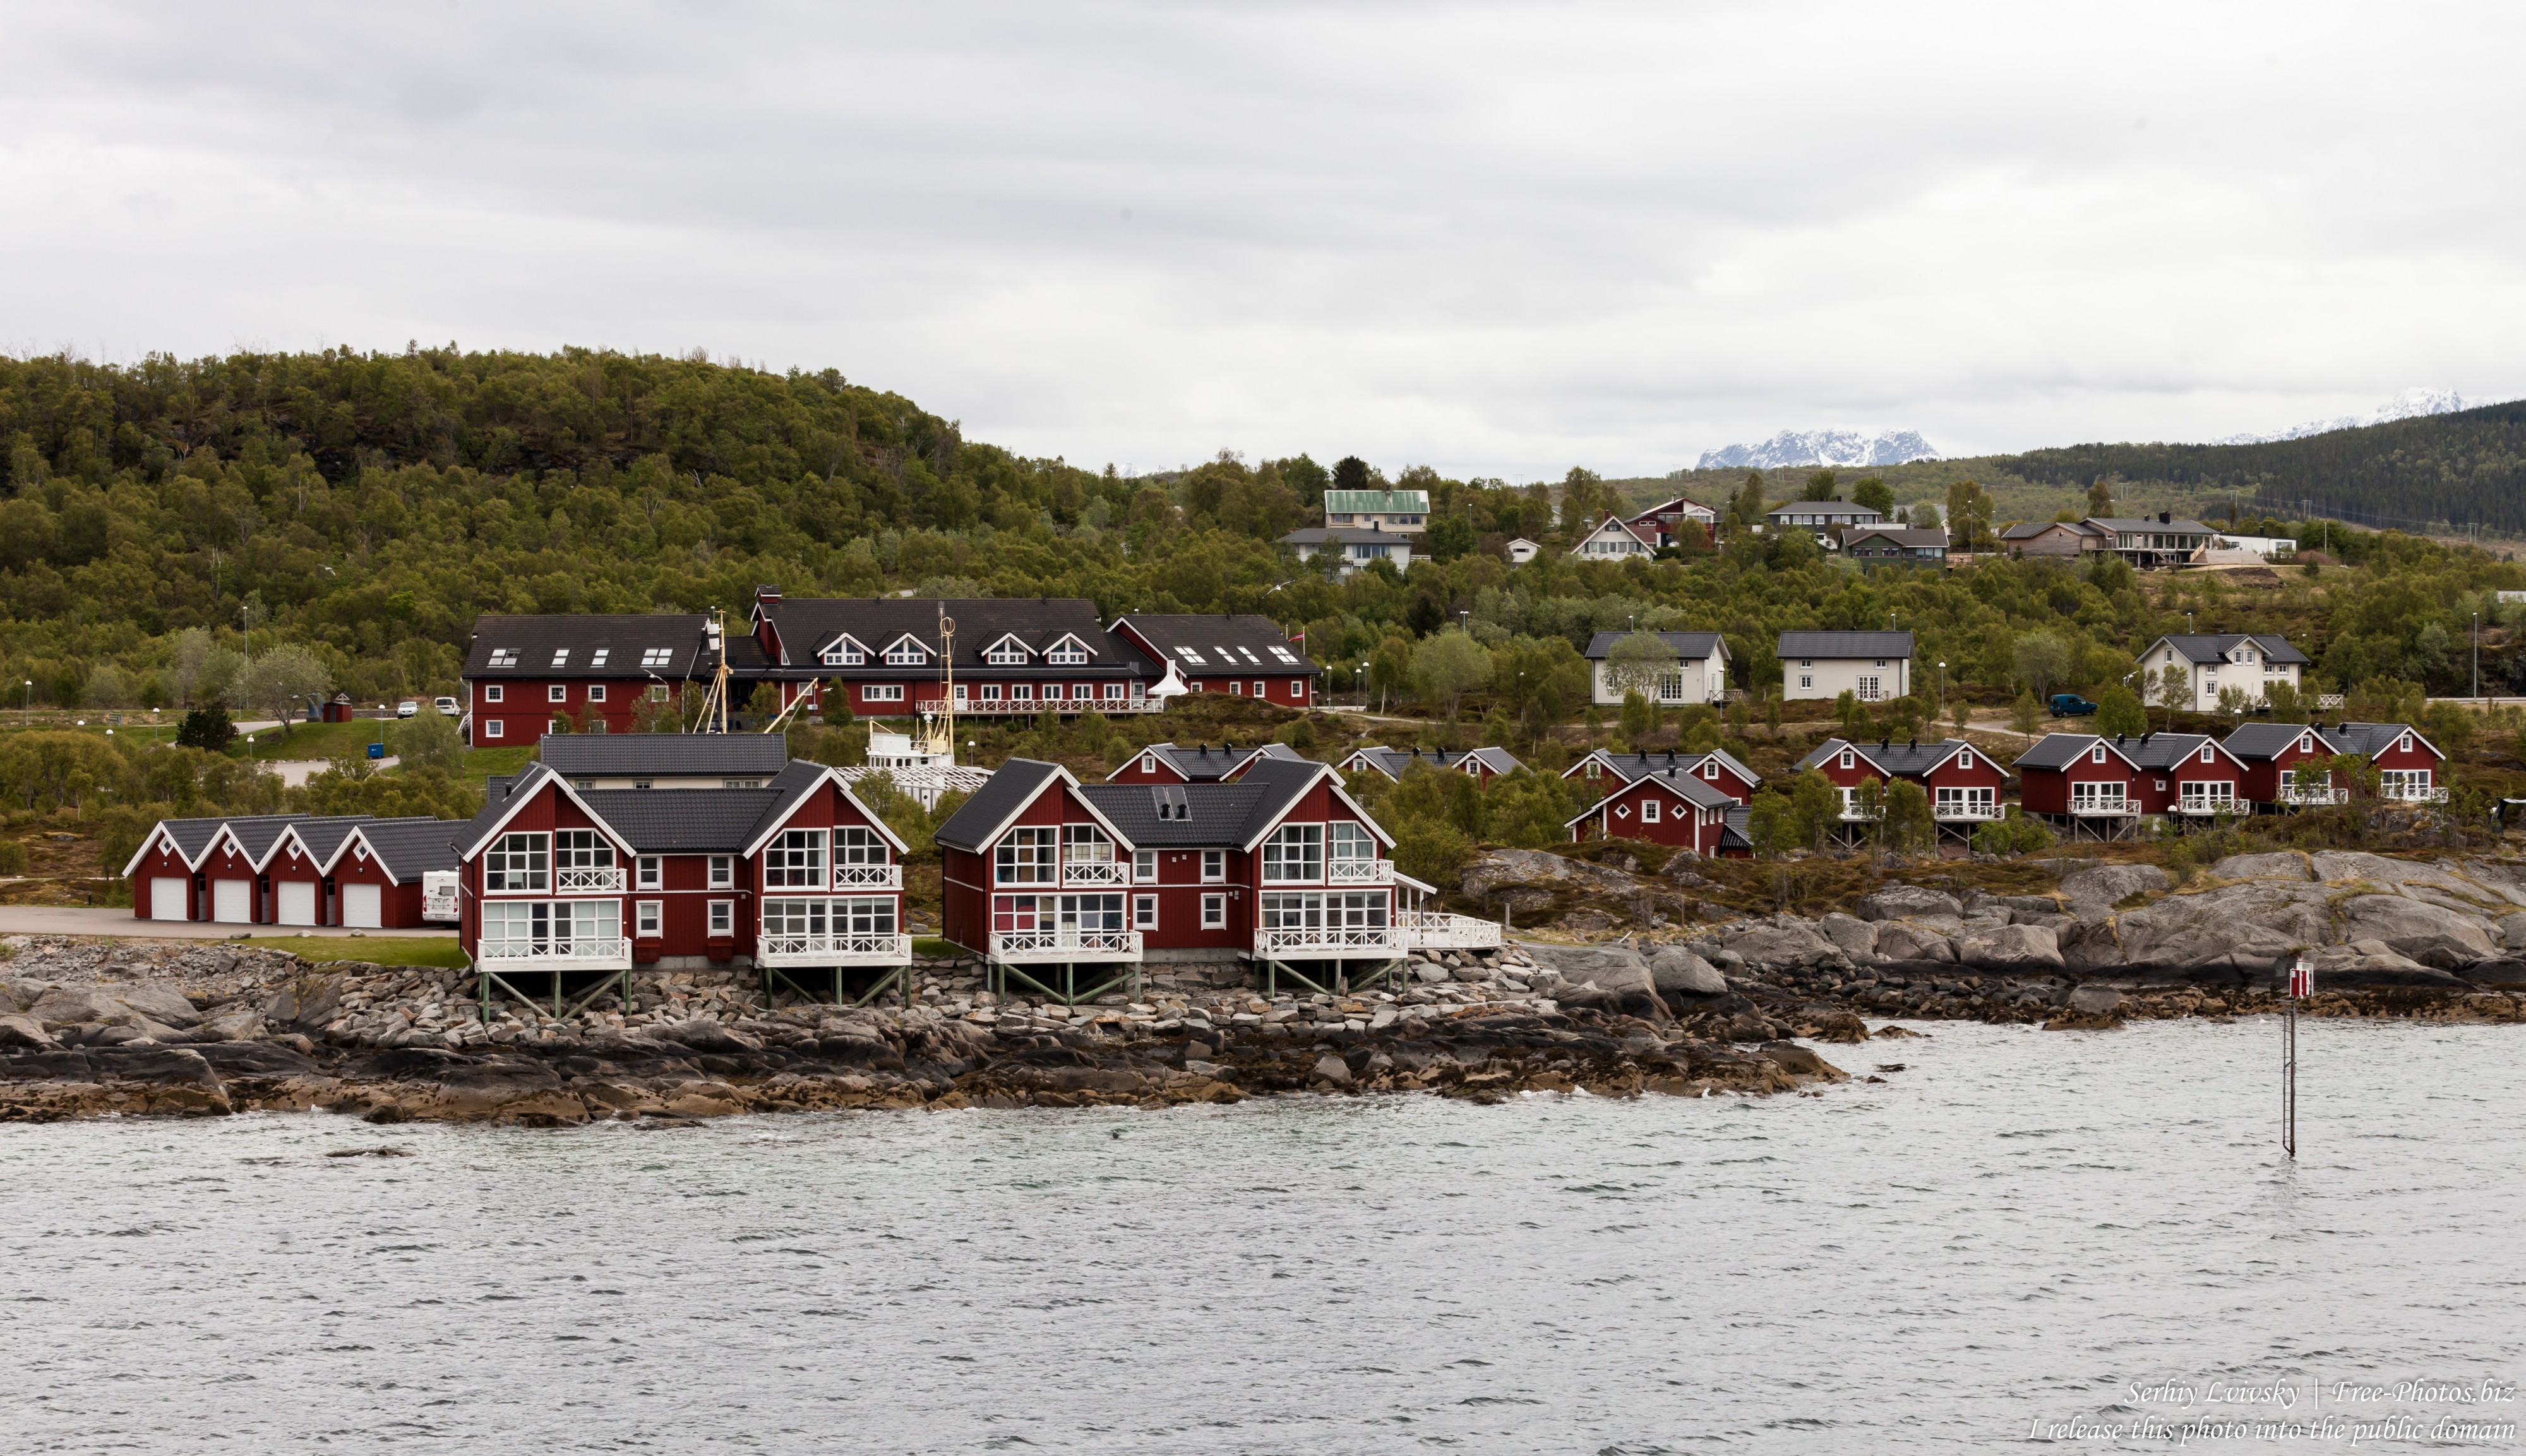 Stokmarknes, Norway, photographed in June 2018 by Serhiy Lvivsky, picture 6